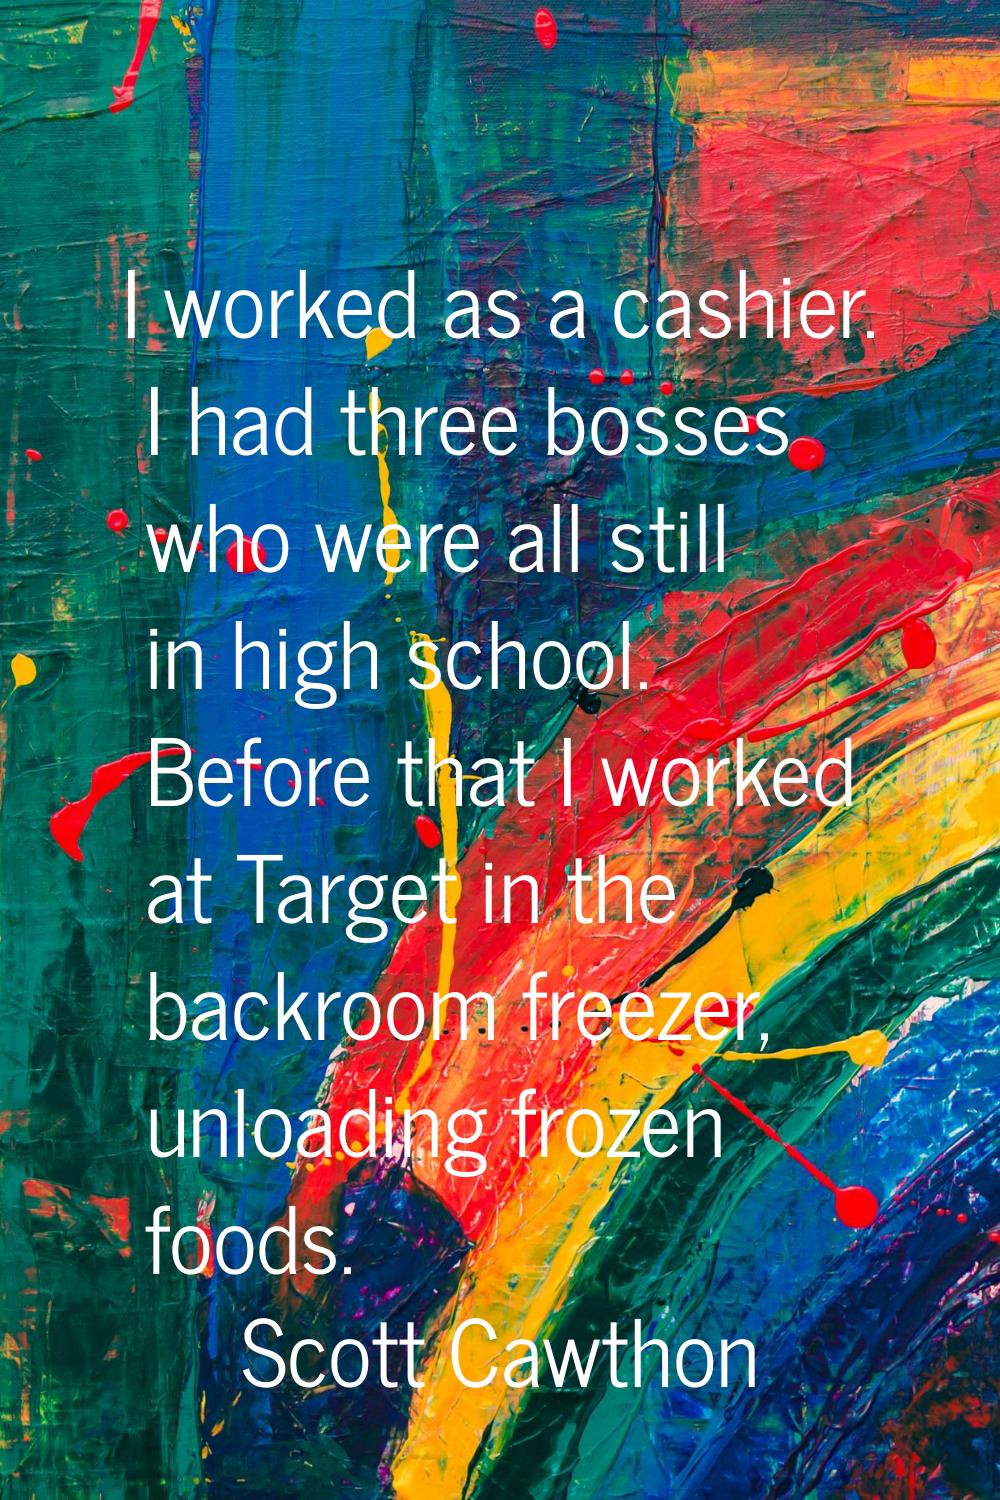 I worked as a cashier. I had three bosses who were all still in high school. Before that I worked a